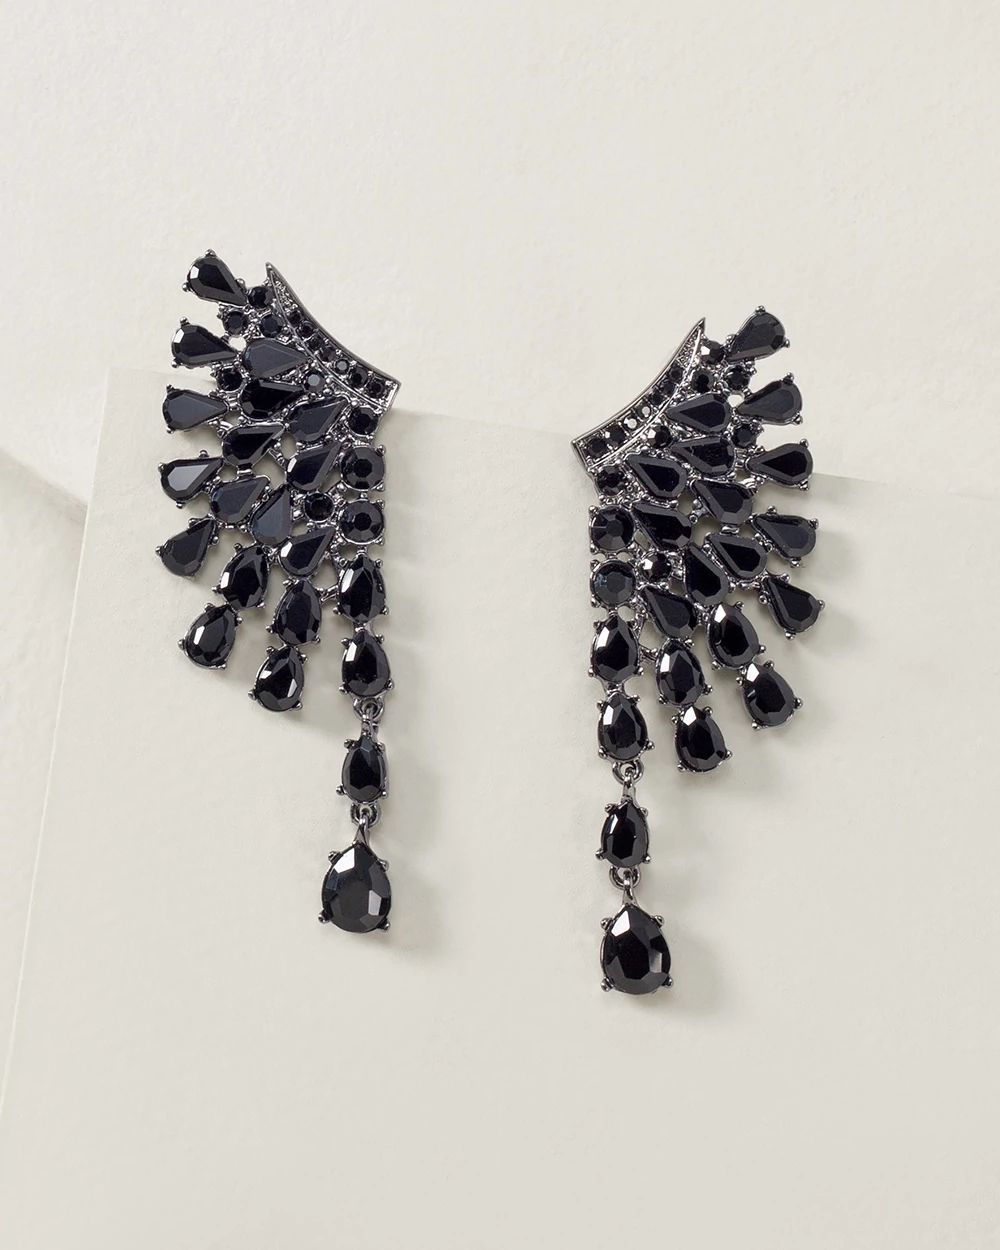 Crystal Wing Shaped Earrings click to view larger image.